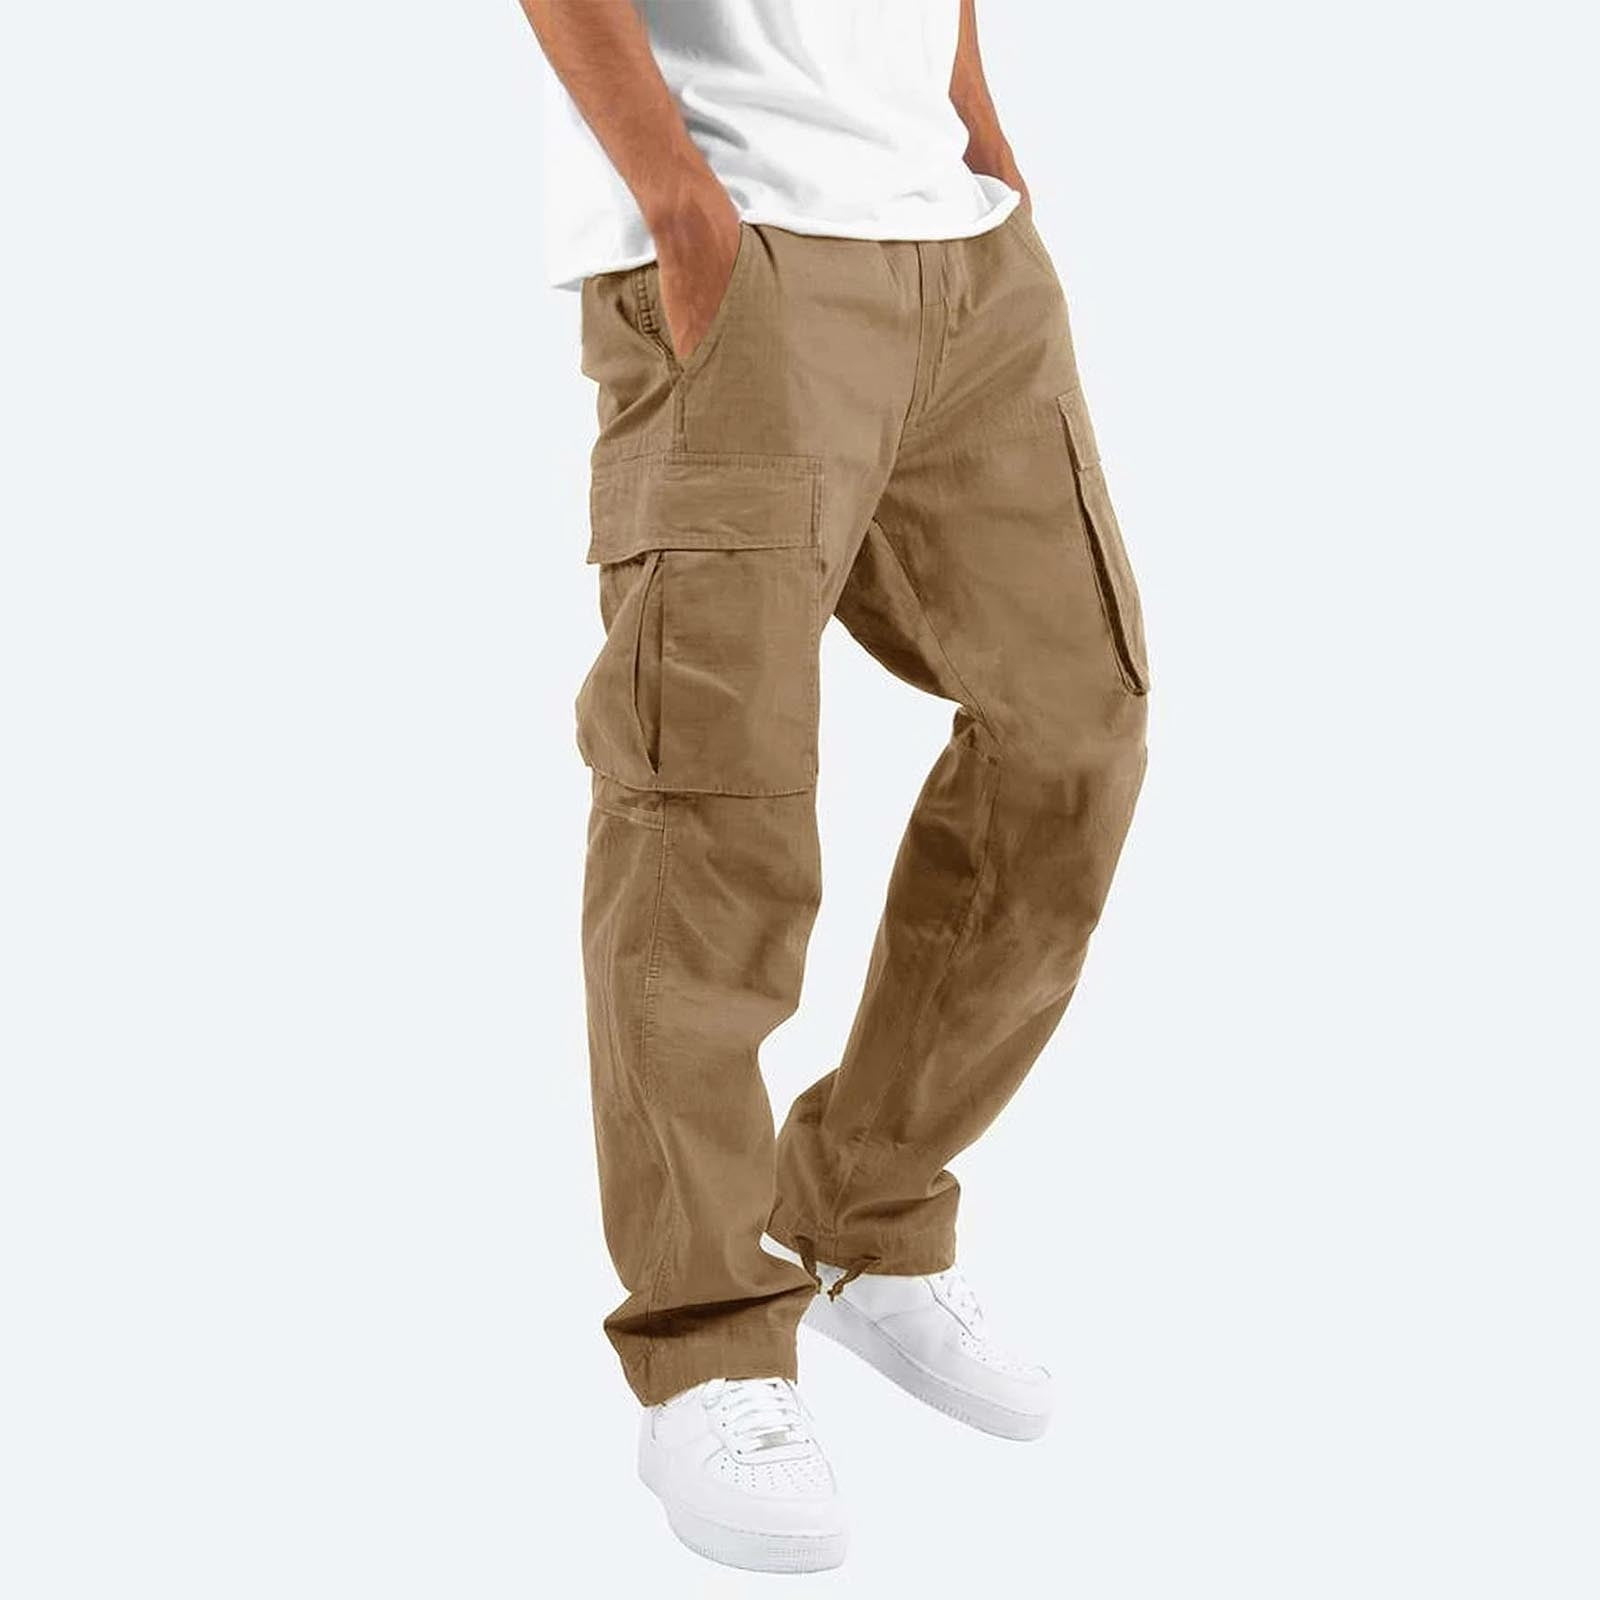 symoid Mens Cargo Pants- Solid Casual Multiple Pockets Outdoor Straight  Type Fitness Pants Cargo Pants Trousers Khaki S